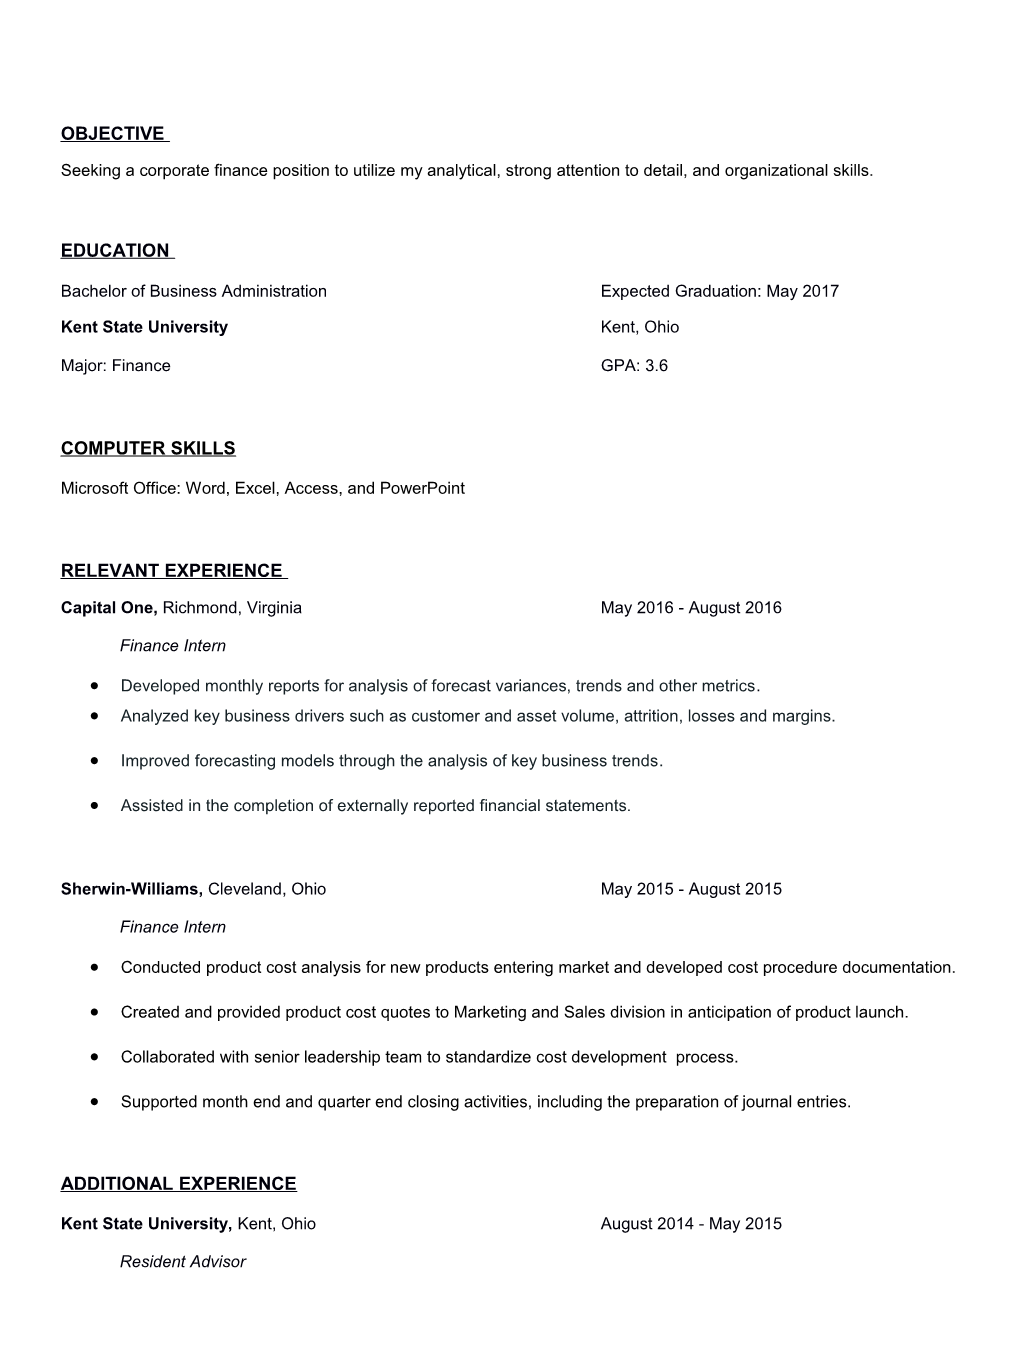 Seeking a Corporate Finance Position to Utilize My Analytical, Strong Attention to Detail